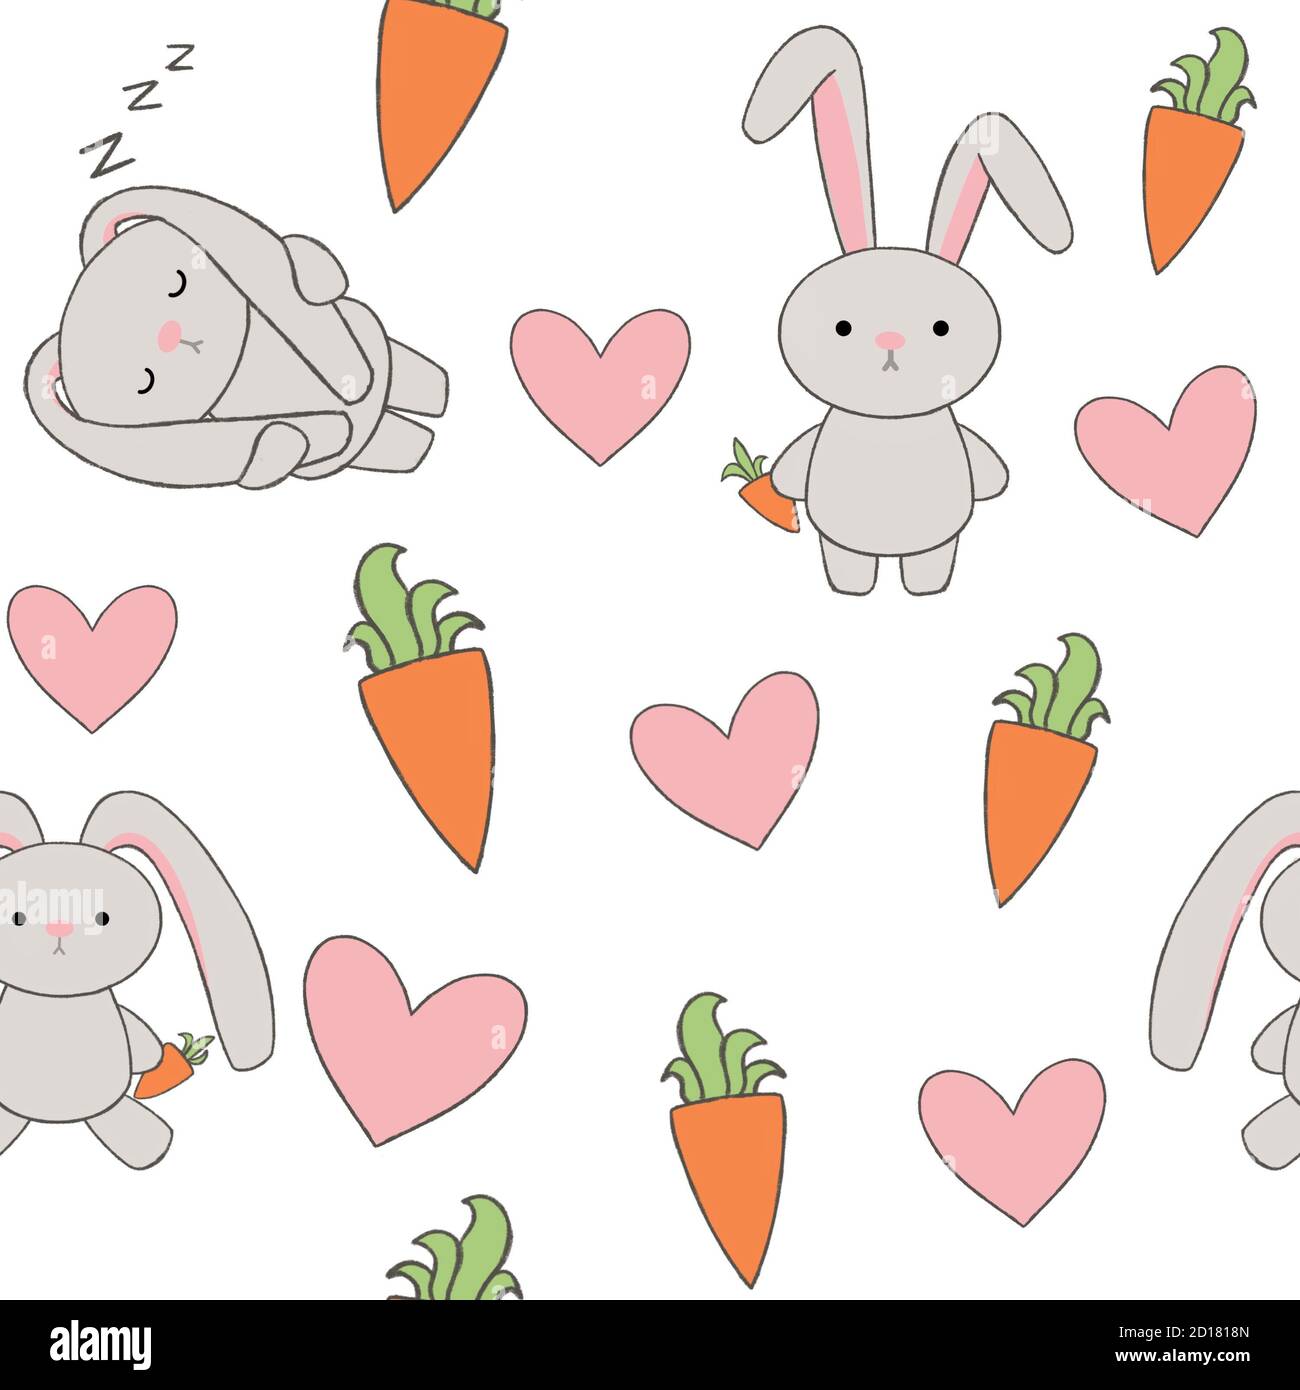 seamless pattern bunny holding a carrot and sleeping rabbit with hearts. cute illustration for children book or greeting card. bunny print for wallpaper or kids clothes.  Stock Photo